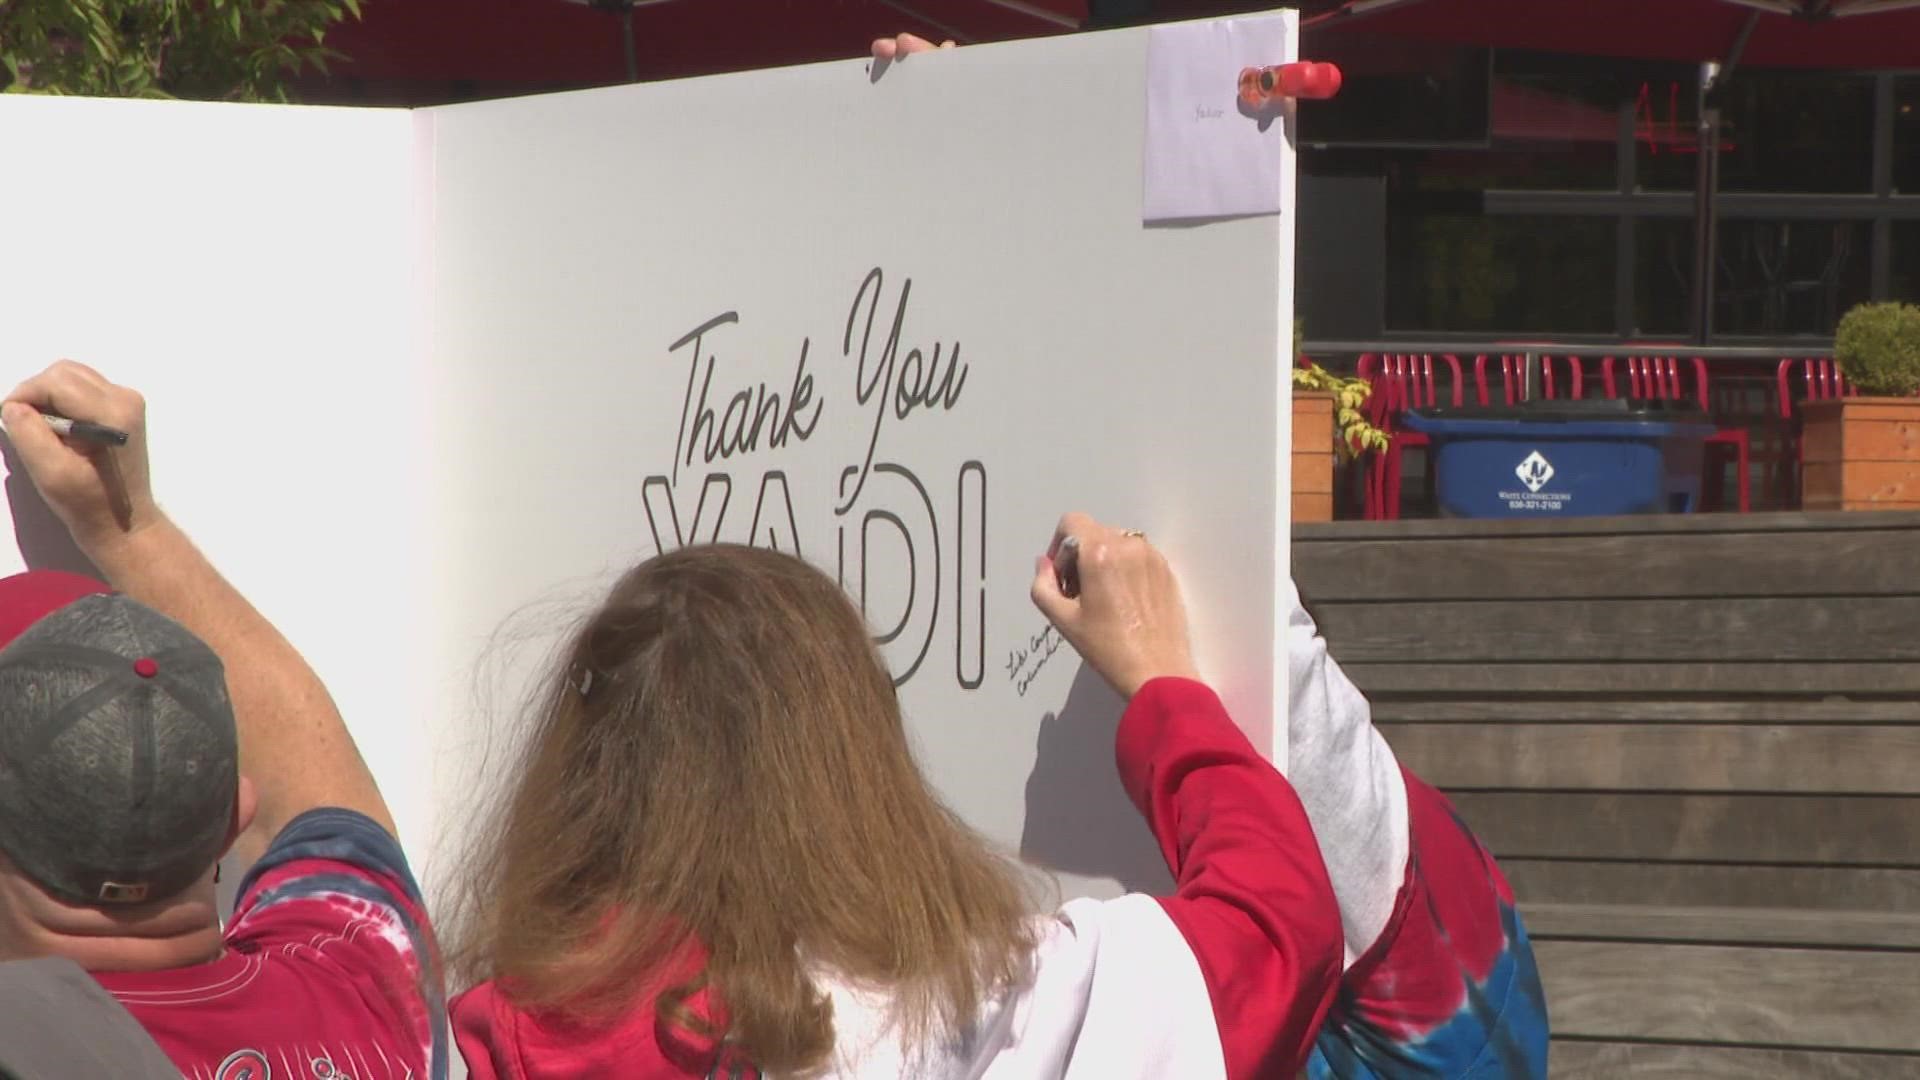 Cards fans can sign giant greeting cards for the retiring players. Albert Pujols and Yadier Molina are signing off but fans can say "thank you."